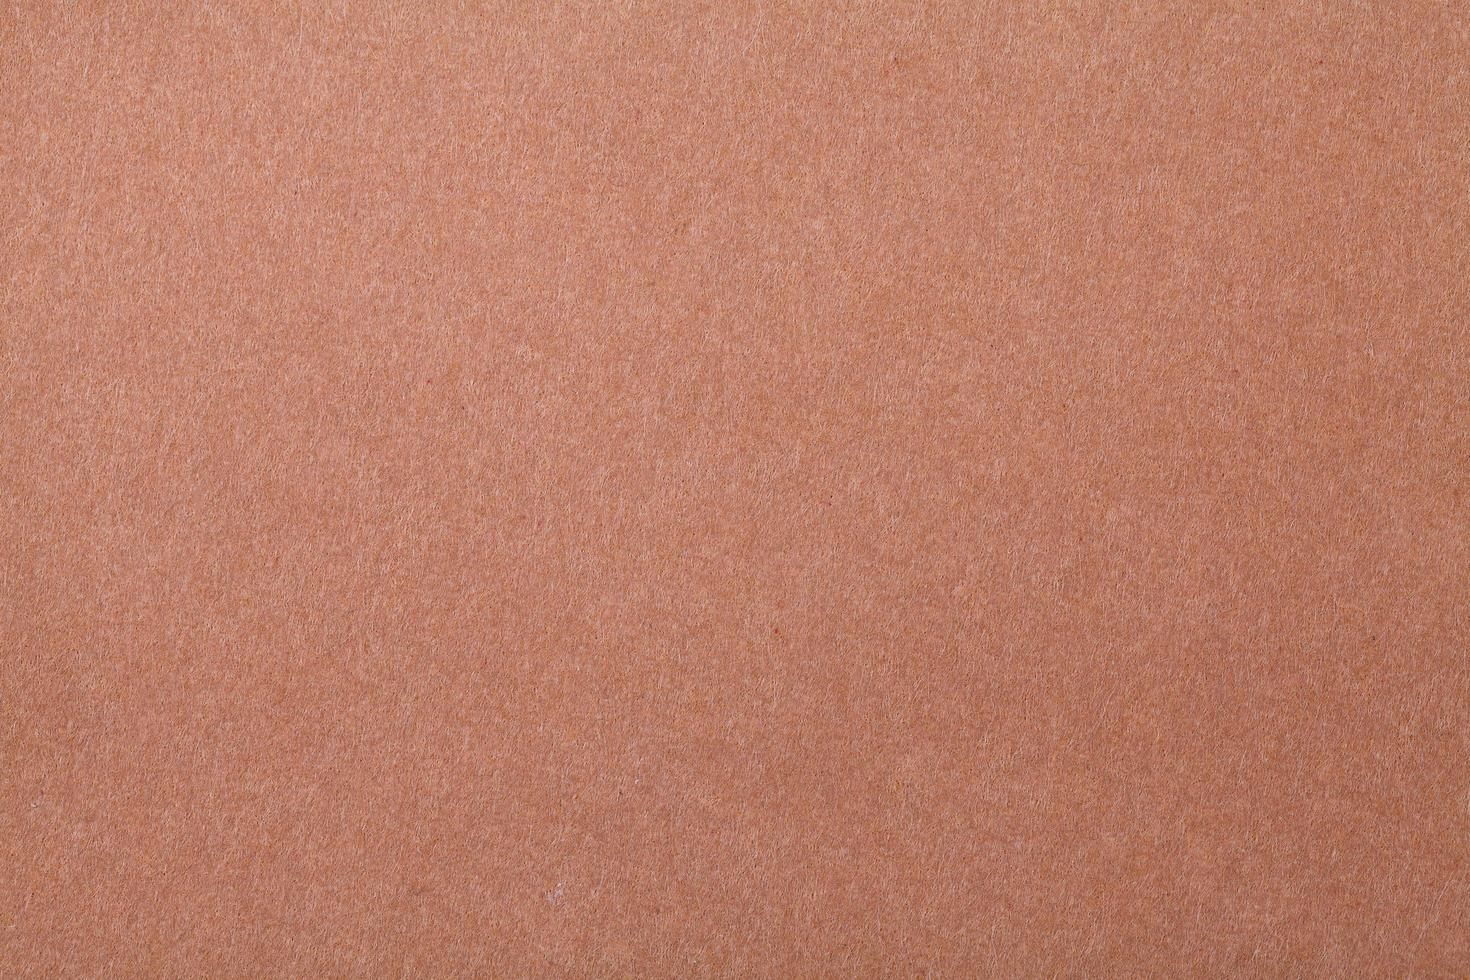 brown paper textures background photo